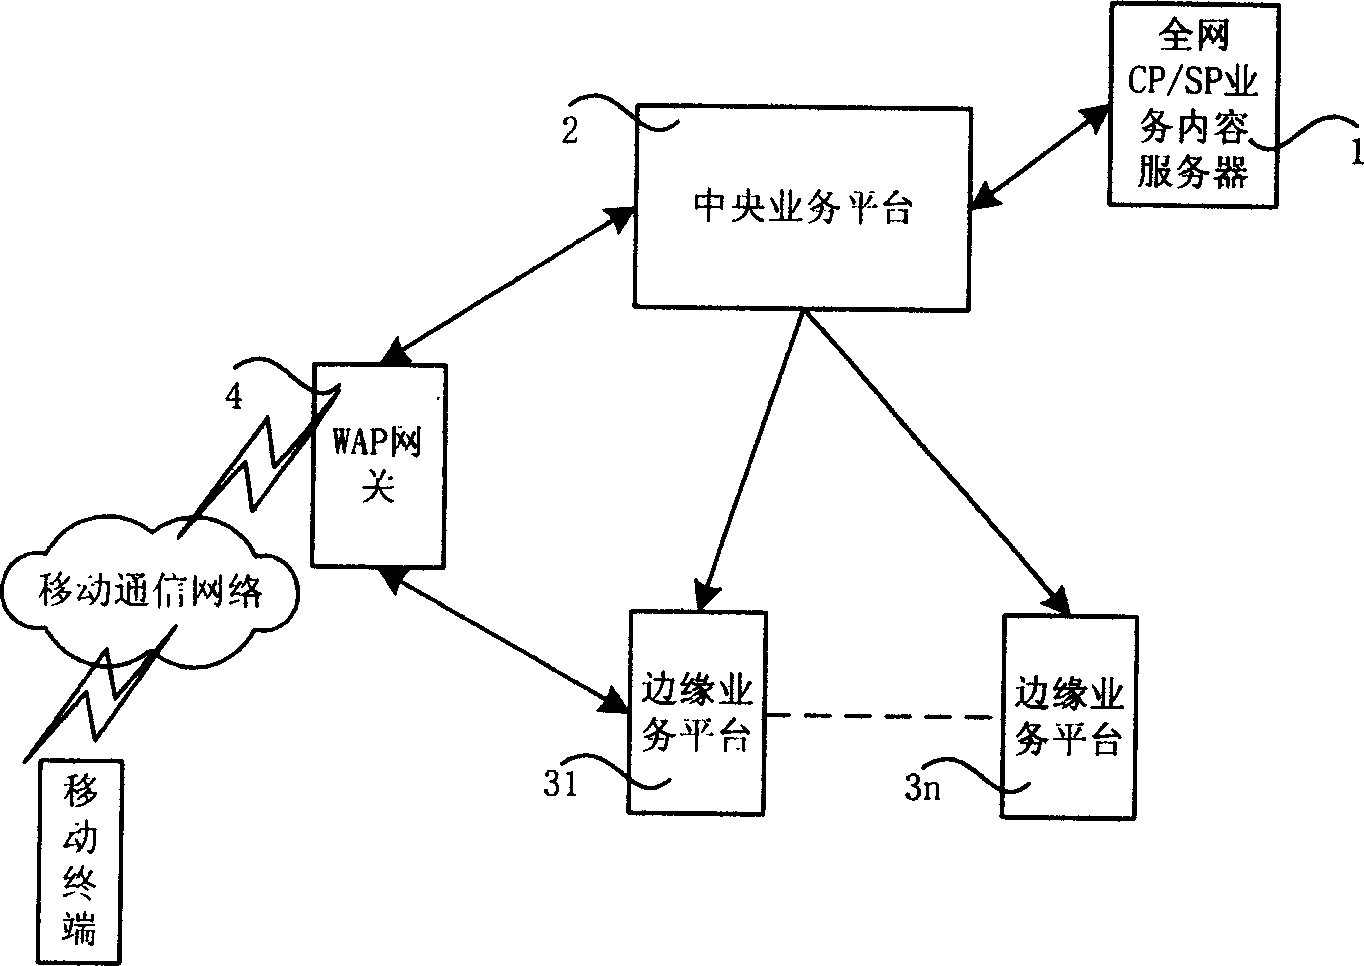 Multi-stage distributed network system